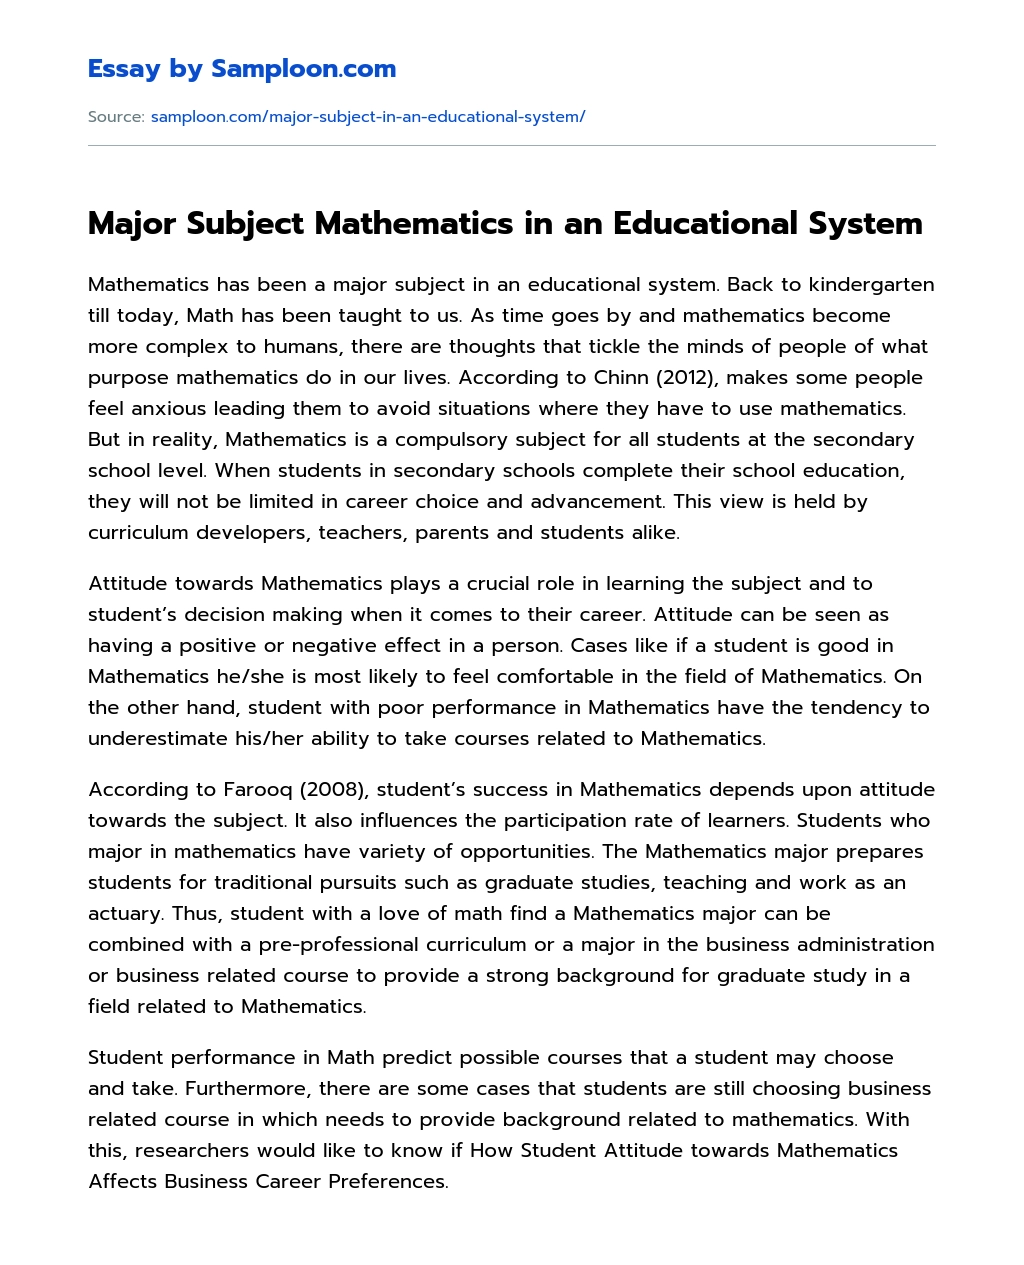 Major Subject Mathematics in an Educational System essay